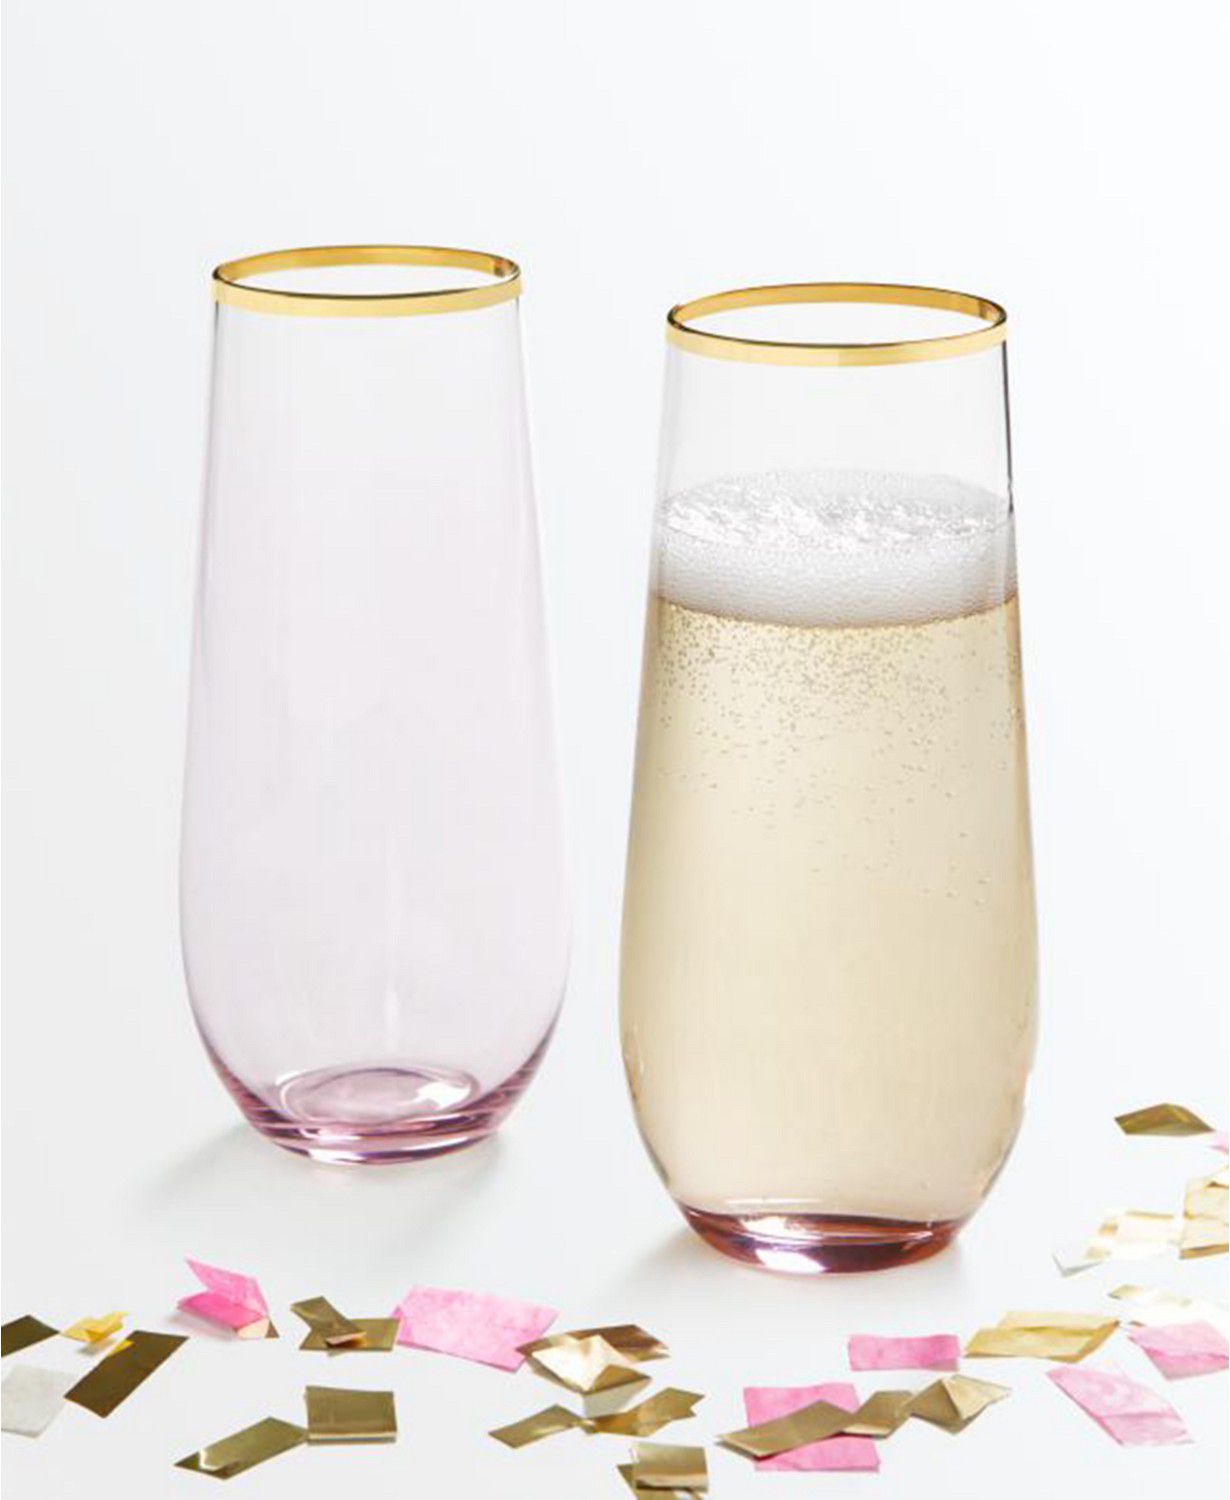 Martha Stewart Collection Stemless Wine Glasses with Gold Rim